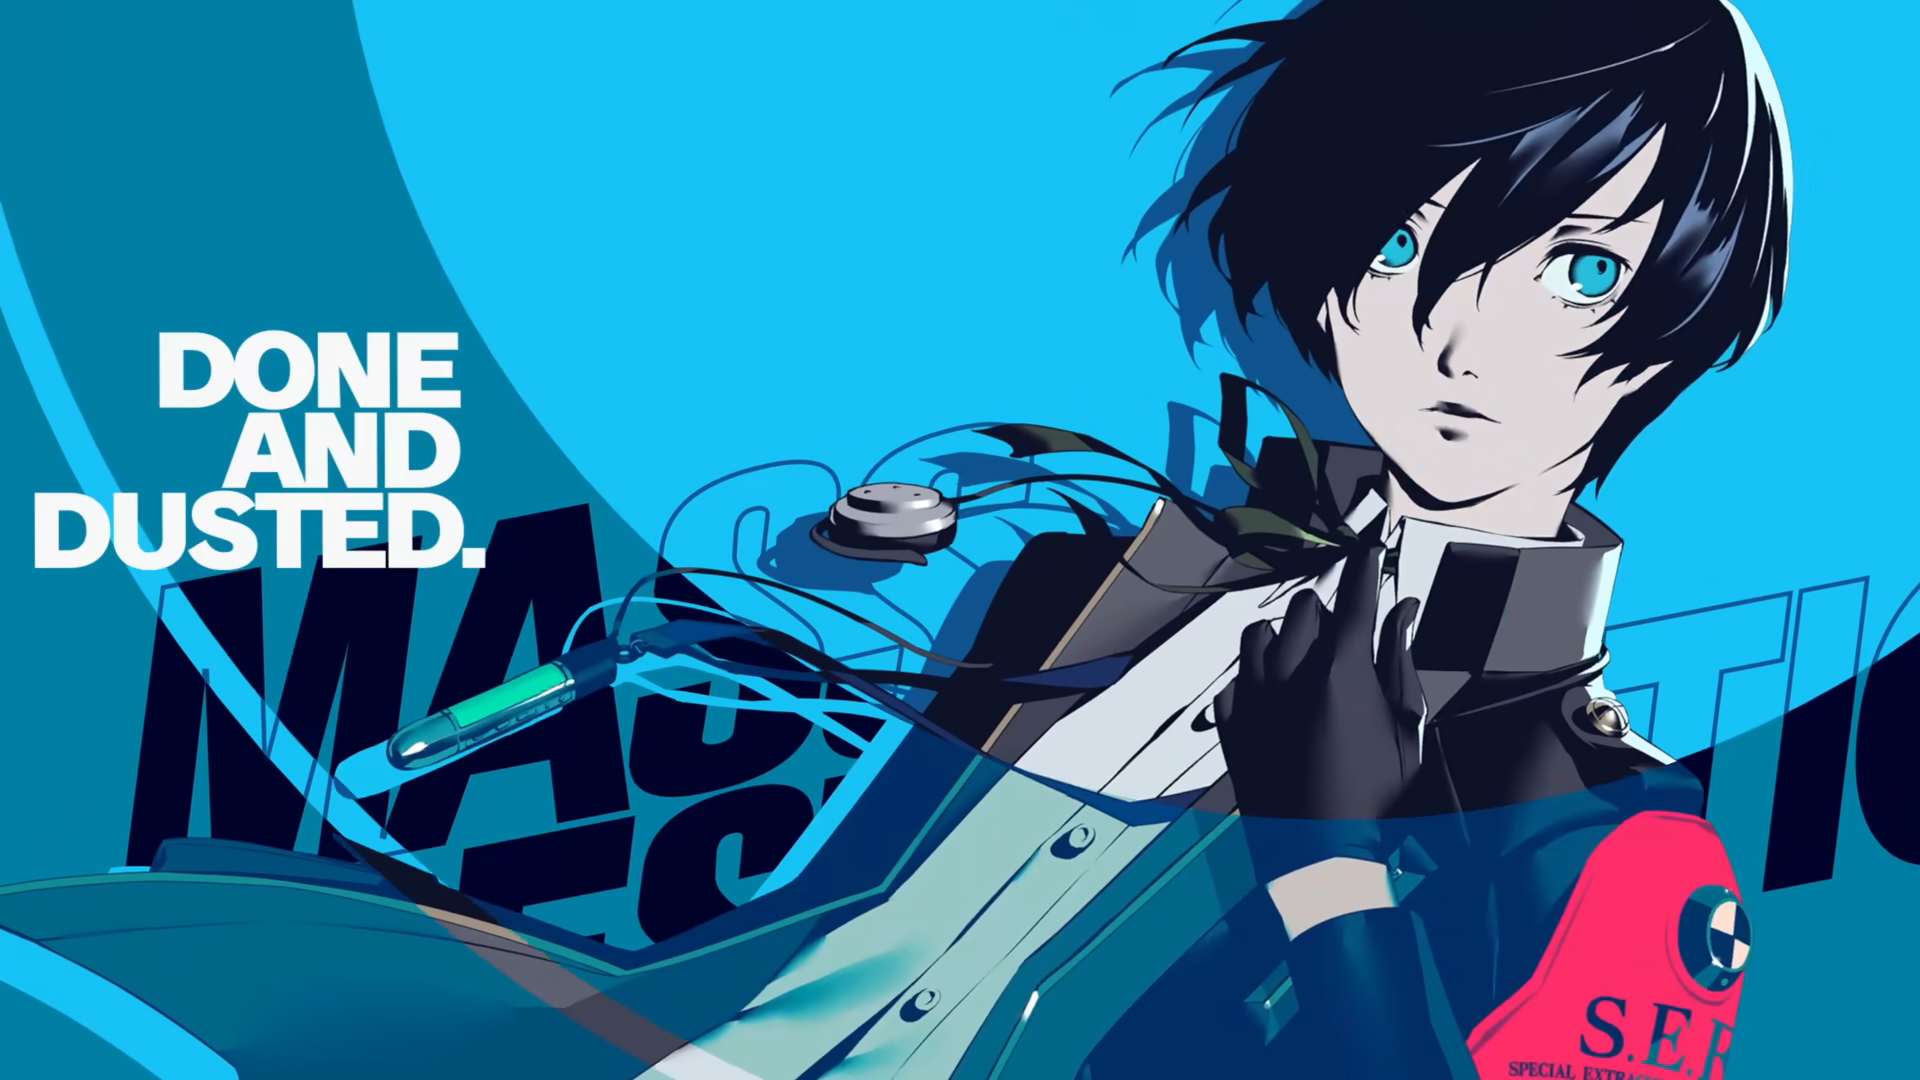 Persona 3 Reload — Battle BGM & Gameplay Reveal